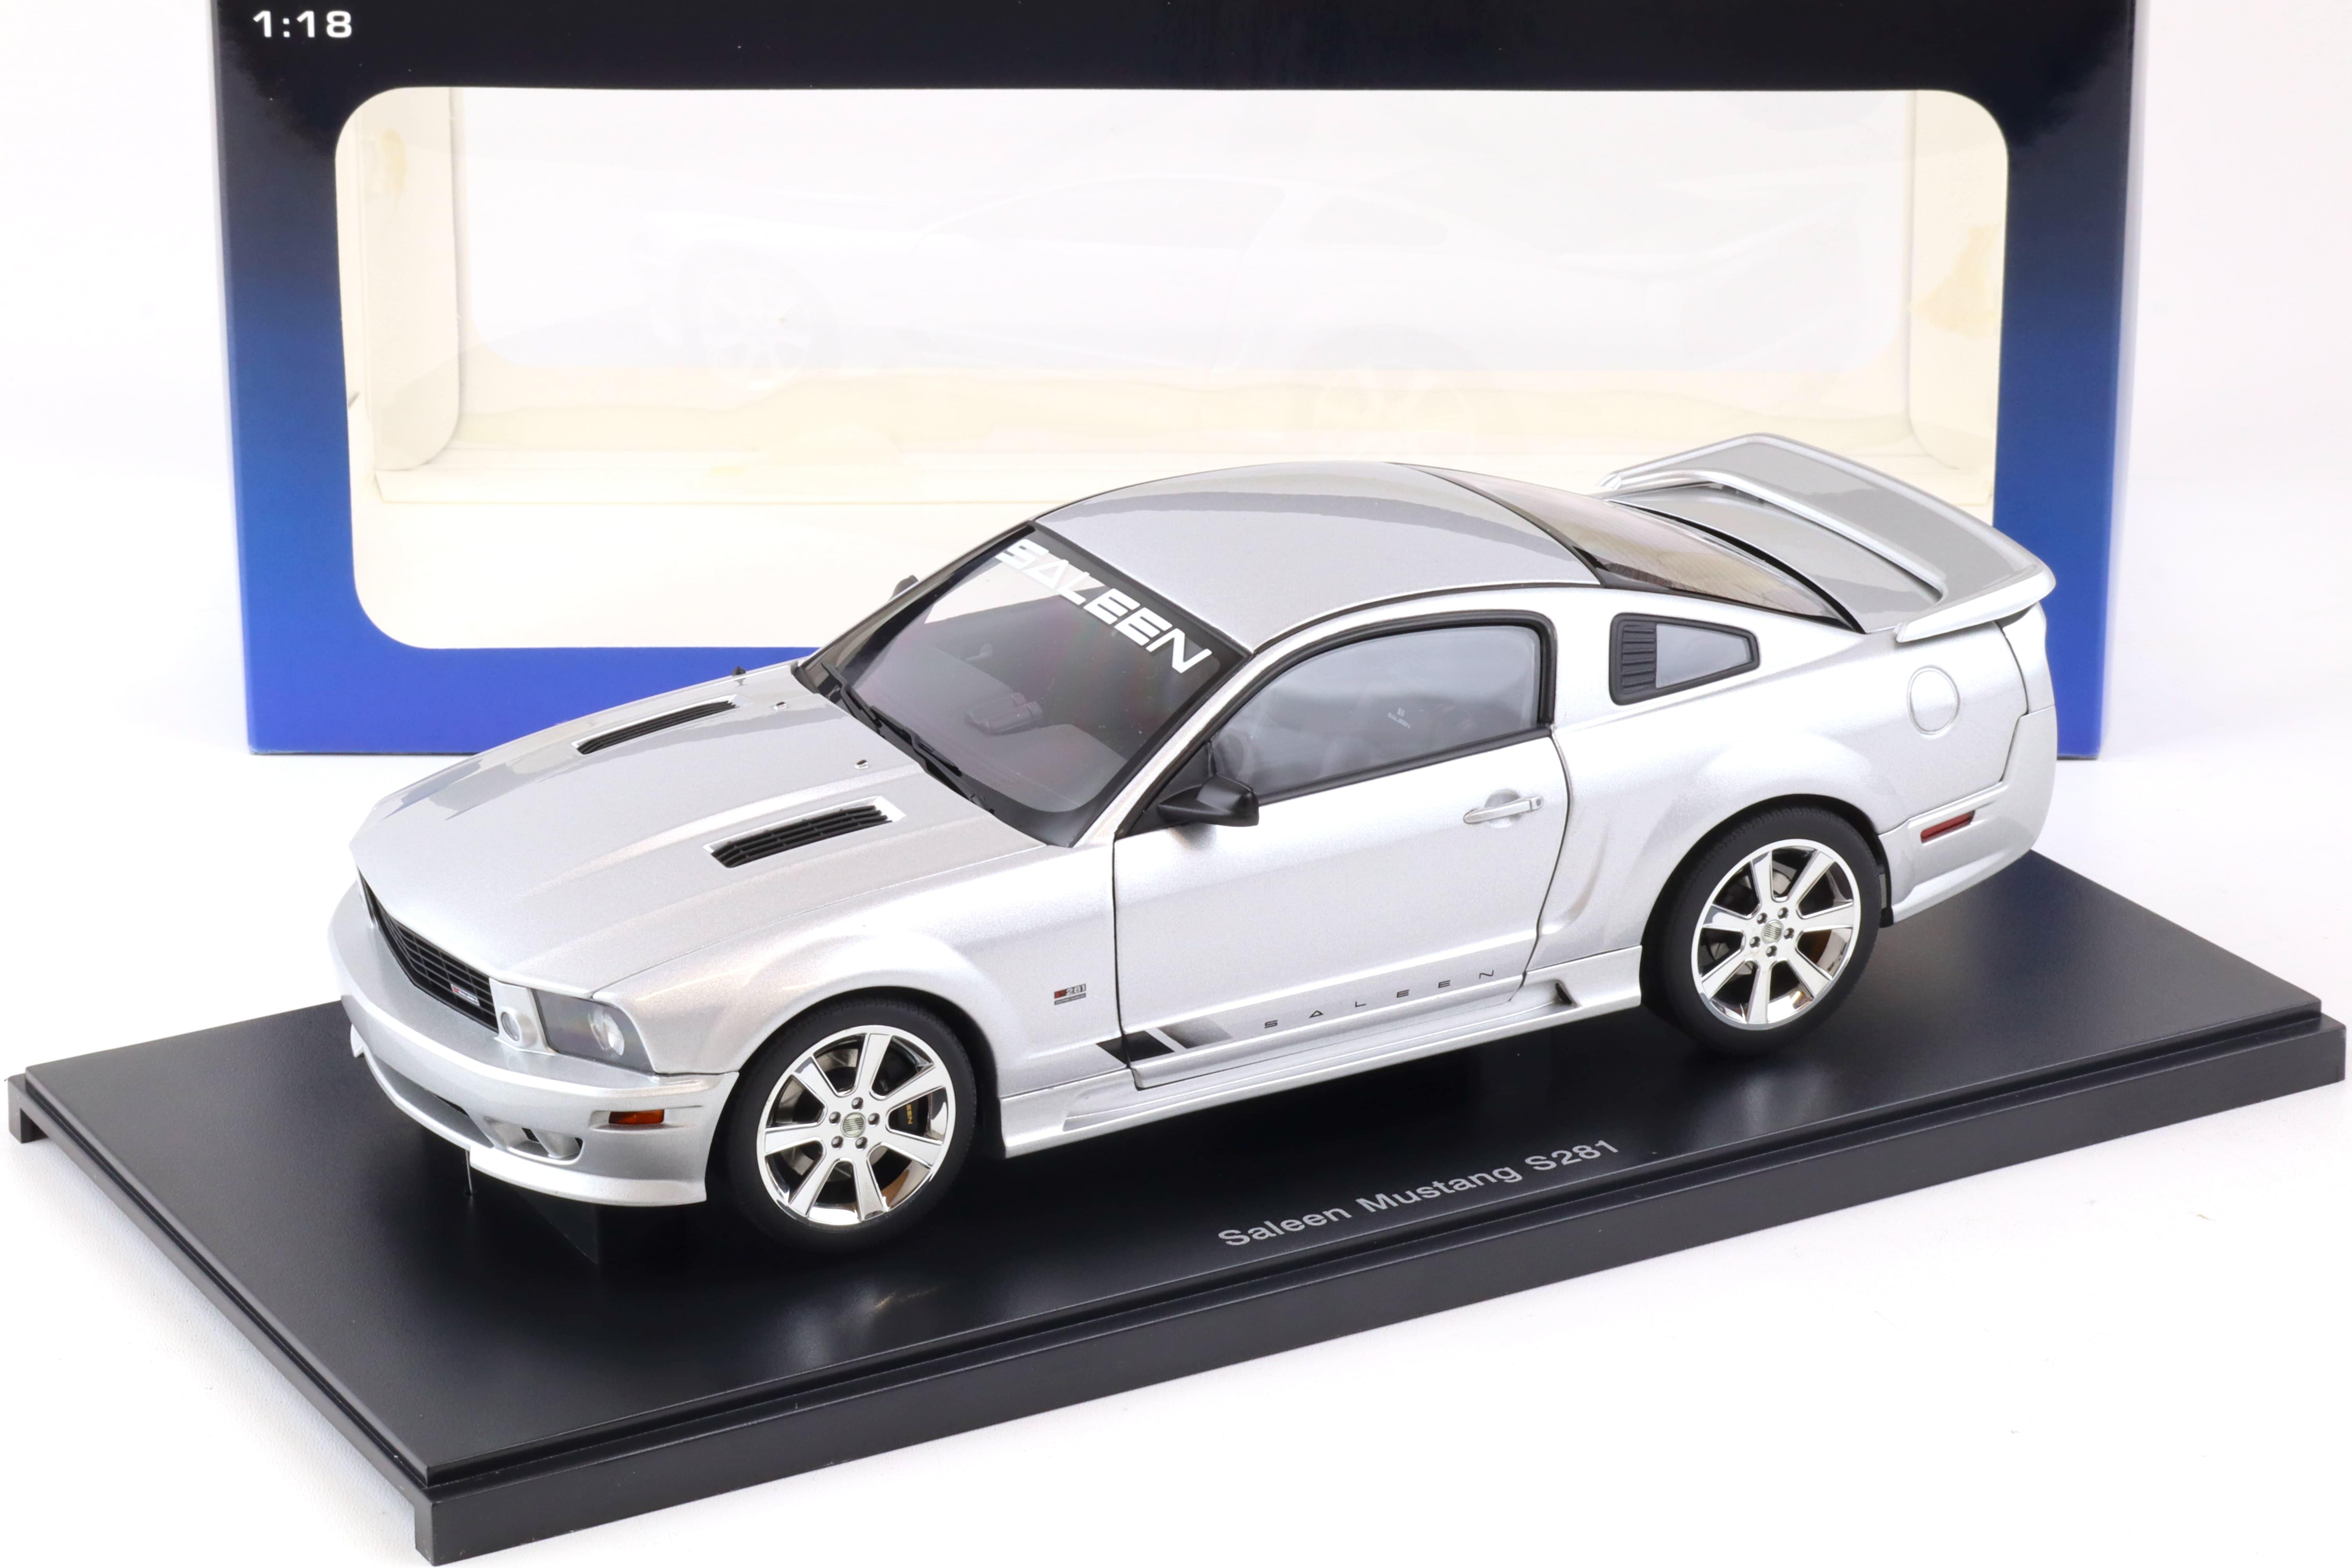 1:18 AUTOart Saleen Mustang S281 SUPERCHARGED Coupe silver 73057